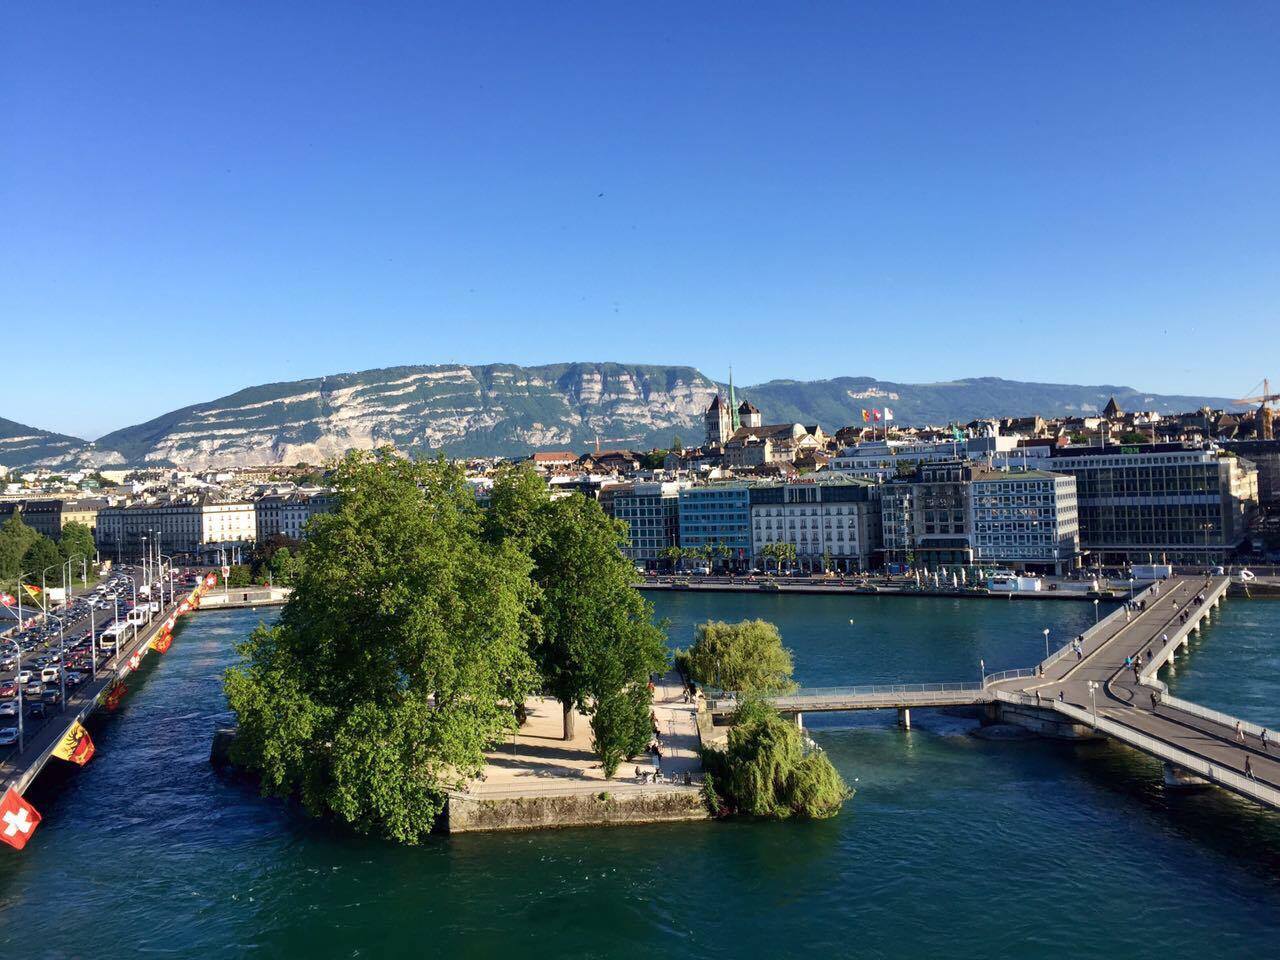   This small island to the right of Pont de Mont-Blanc is known as  Île Rousseau , named after the famed philosopher Jean-Jacques Rousseau. His works including the Discourse on Inequality and The Social Contract have been integral in the formation of